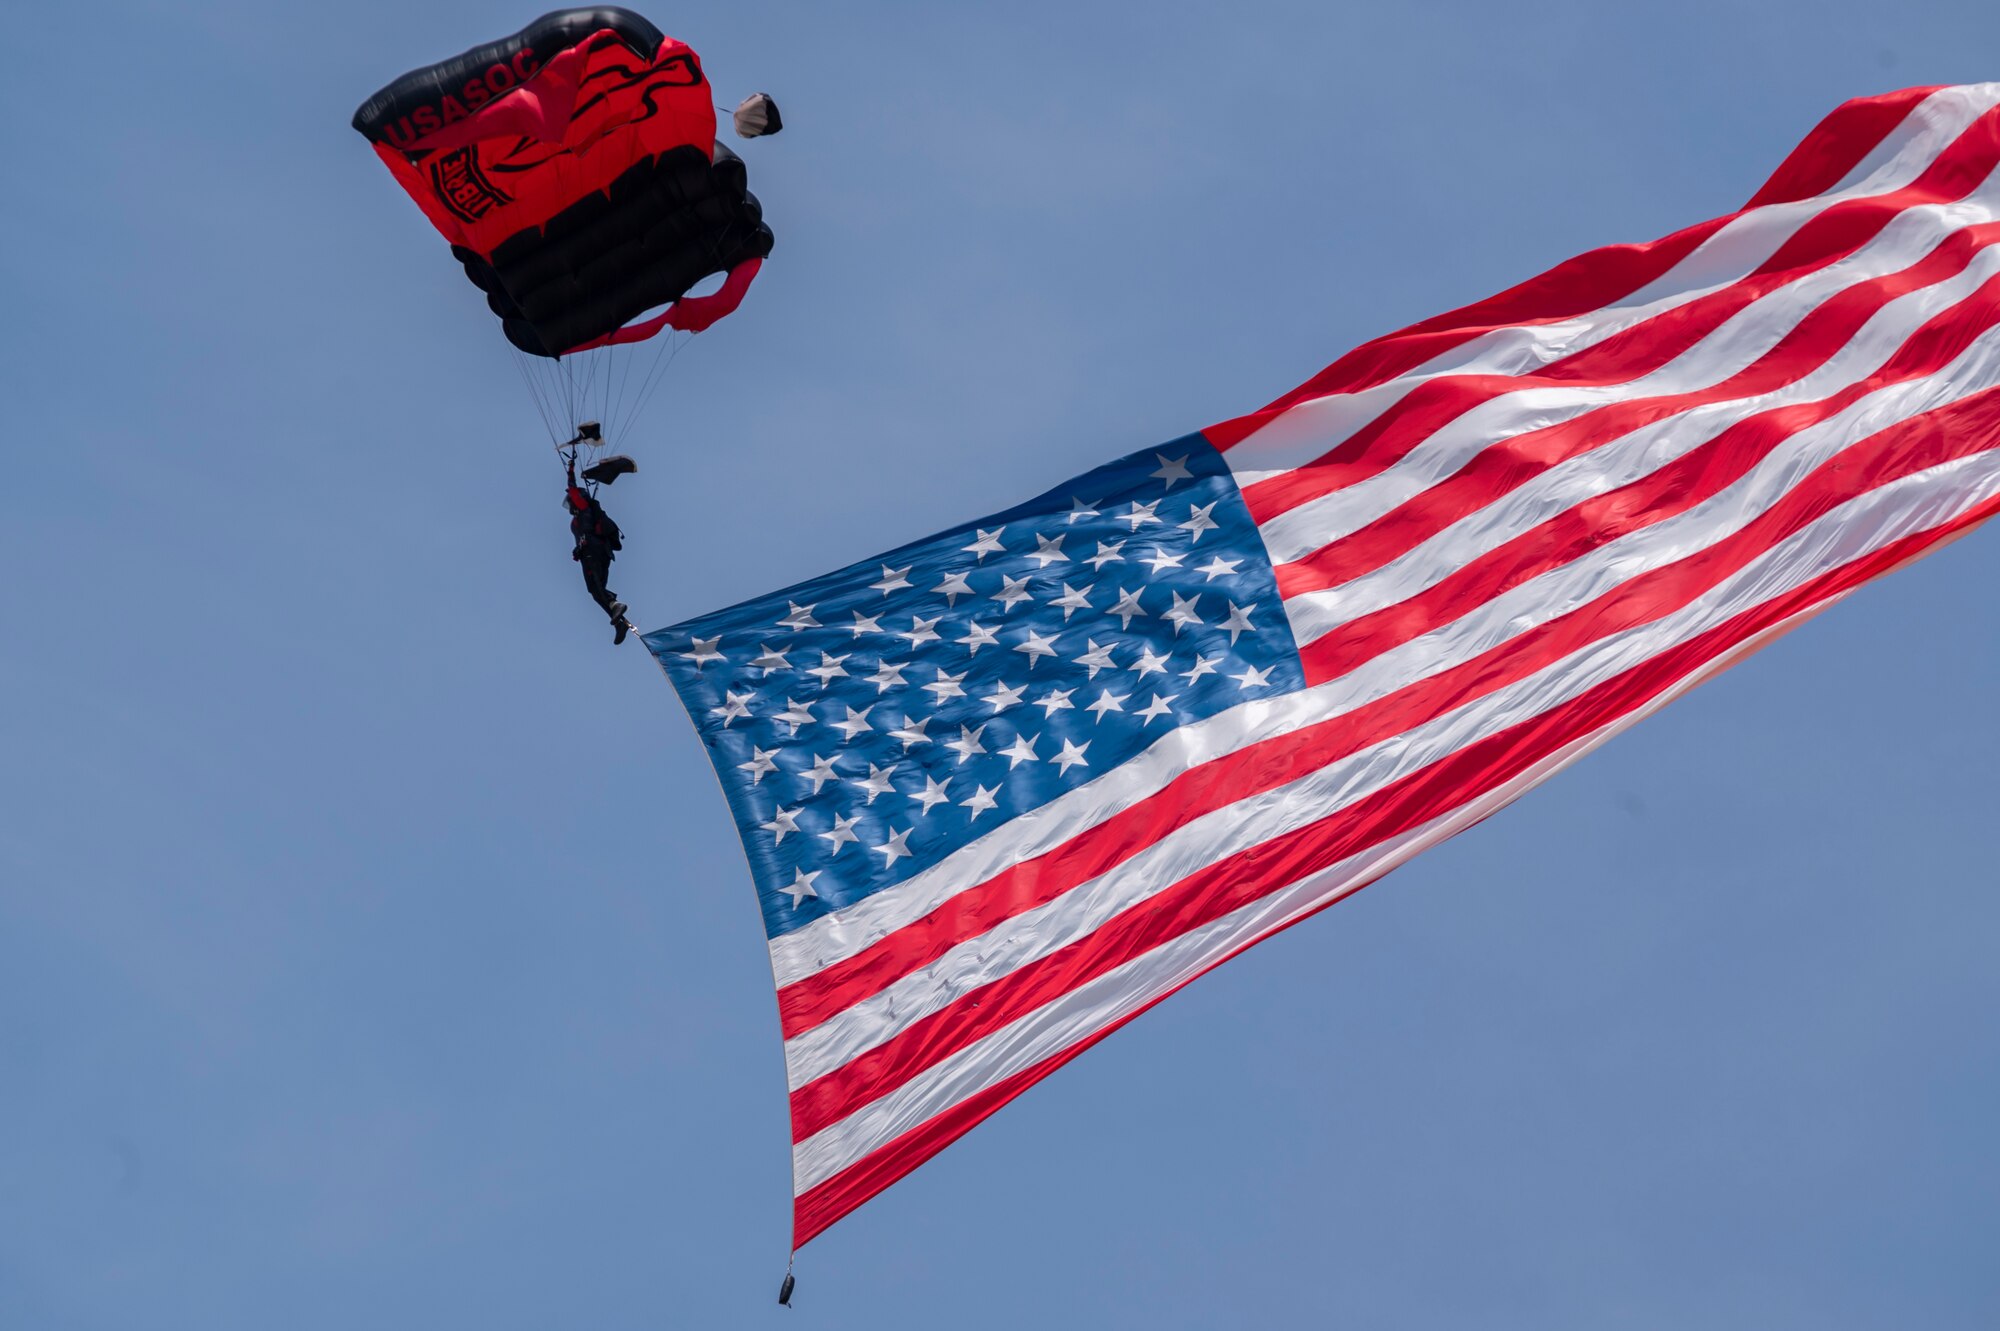 A member of the Black Daggers parachute team glides through the air with a U.S. Flag, May 21, 2022, during the first day of the 2022 Thunder Over Dover Airshow at Dover Air Force Base, Delaware. The Black Daggers are the U.S. Army Special Operations Command’s parachute demonstration team. (U.S. Air Force photo by Airman Simonne Barker)